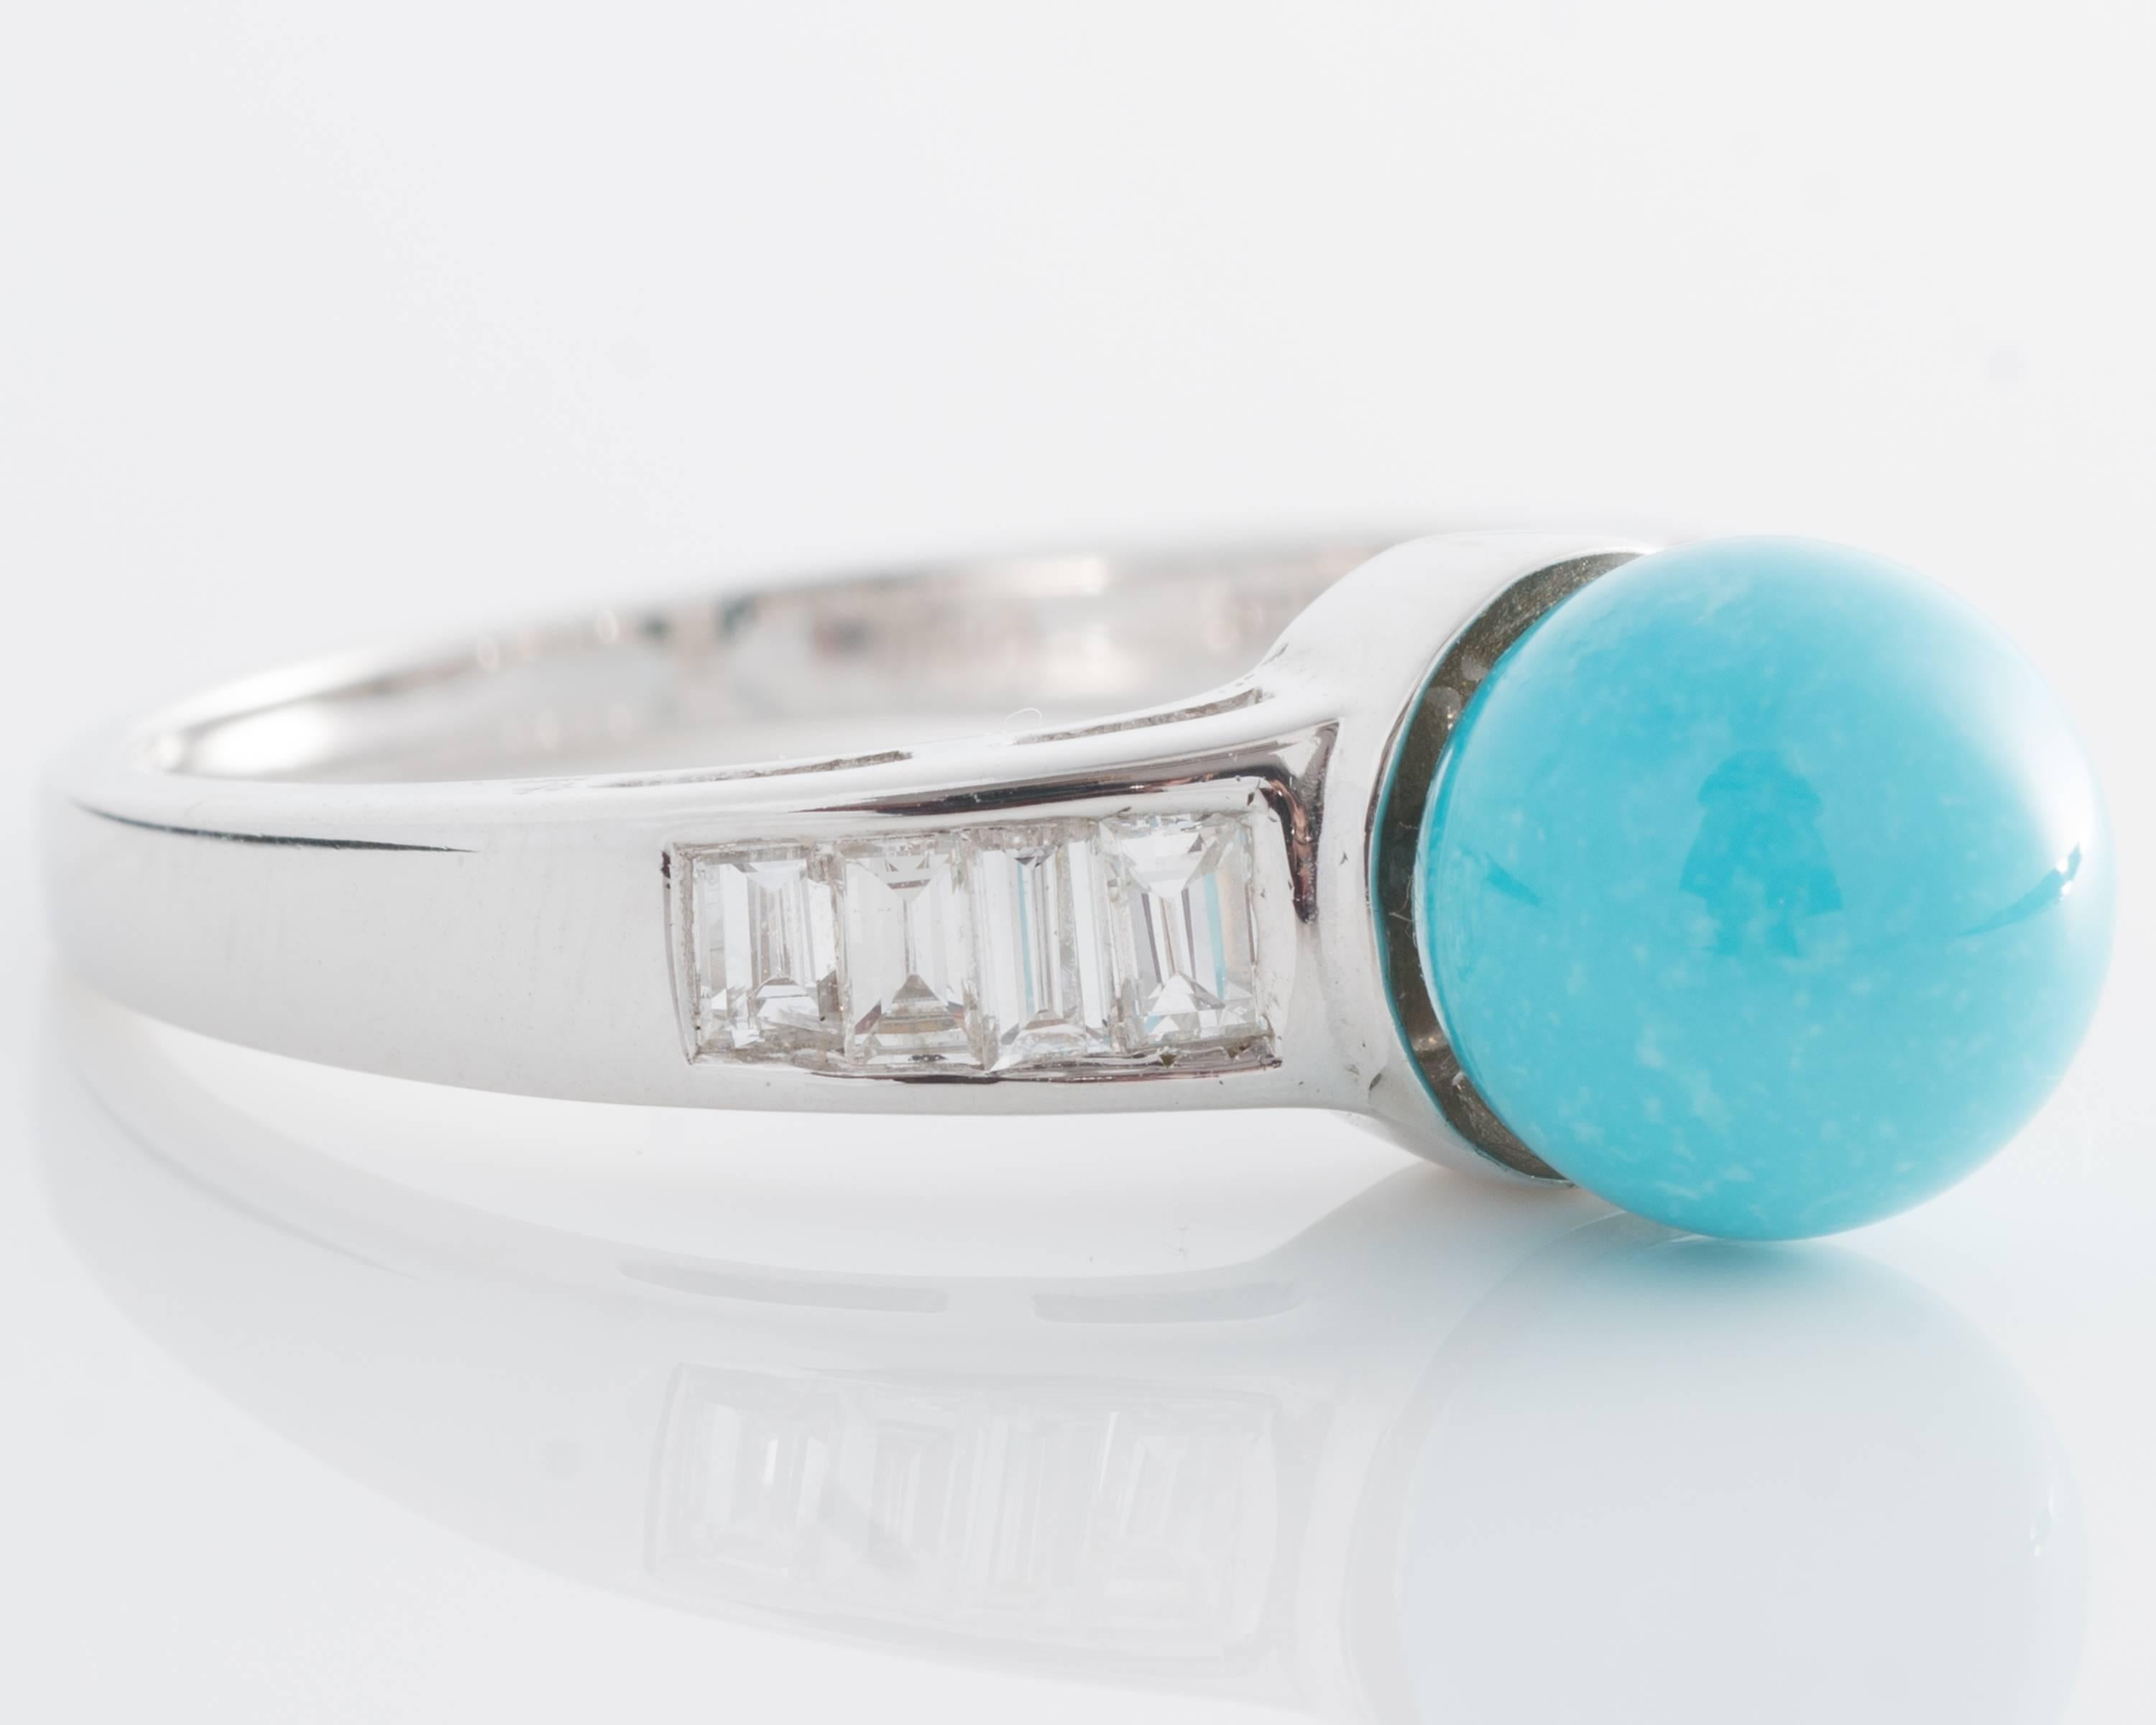 Vintage 1970s Ring - 18K White Gold, Turquoise, Diamonds

Features an 8 millimeter Turquoise cabochon and 8 Diamond Baguettes.
The gorgeous blue Turquoise is center set. It is flanked by 4 Diamond baguettes on each side. The ring shank is crafted